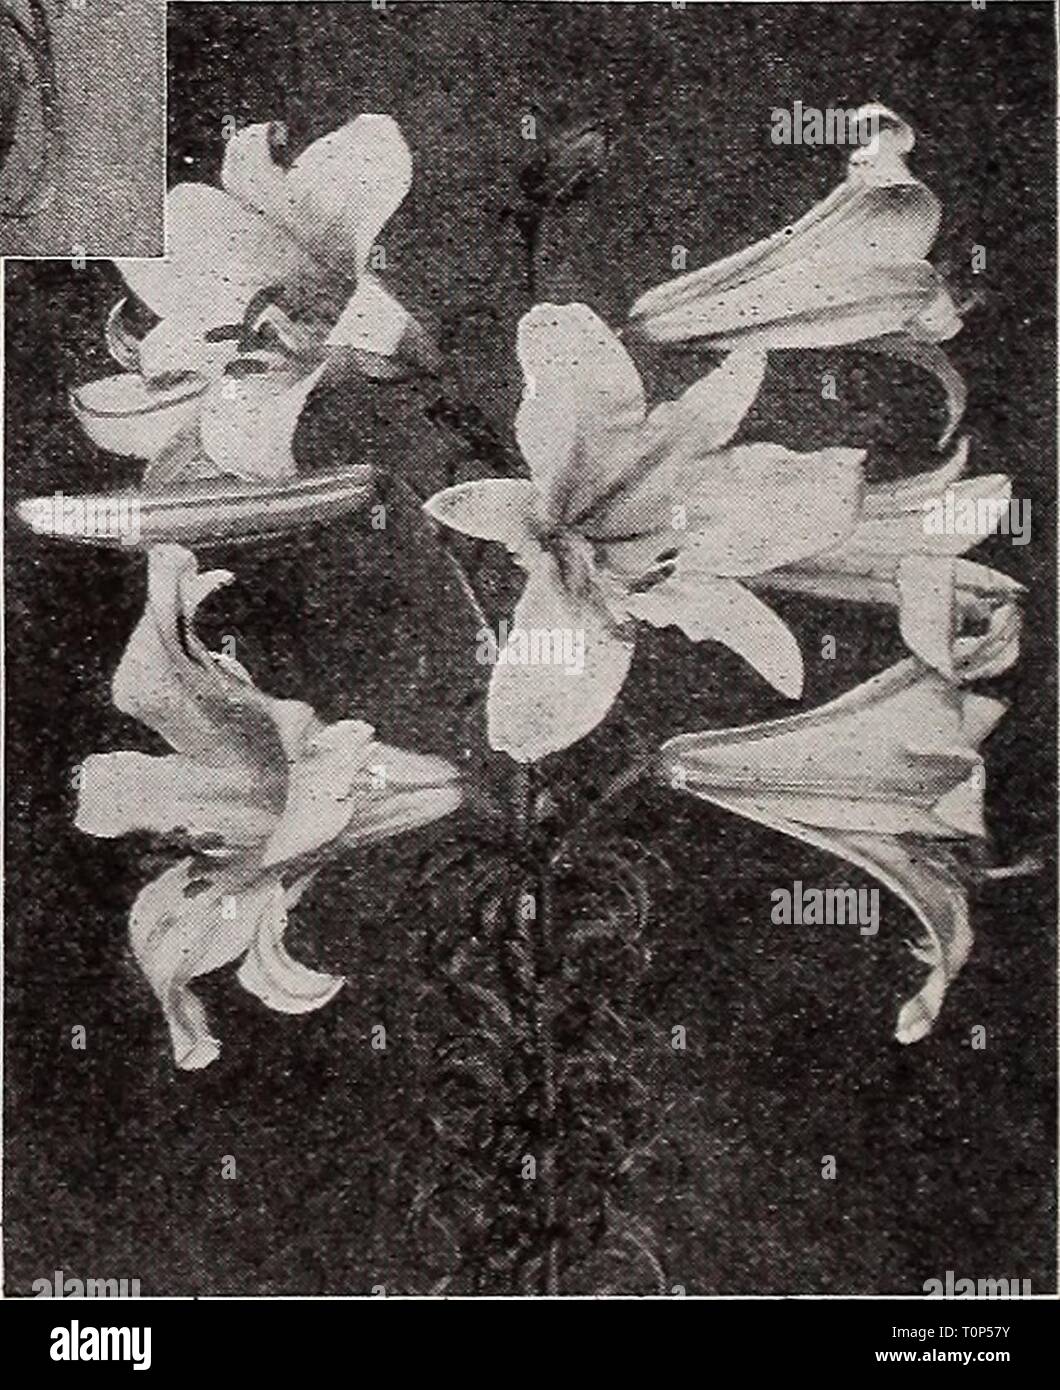 Dreer's autumn catalogue (1933) Dreer's autumn catalogue  dreersautumncata1933henr Year: 1933  Lilium PniLippiNEXbL I uR.MubvM.M Philippinense Formosanum One of the most wonderful Lilies in existence. Flowers of purest white tinted rose outside, about the same size and form as the Easter Lily with same delightful fragrance. They are excellent both for pot culture and the garden, and invaluable for cutting. Under moderate climate will flower continuously year after year; perfectly hardy under severest climatic conditions if protected by mulch or snow. Ready in October. Large, flowering size bul Stock Photo